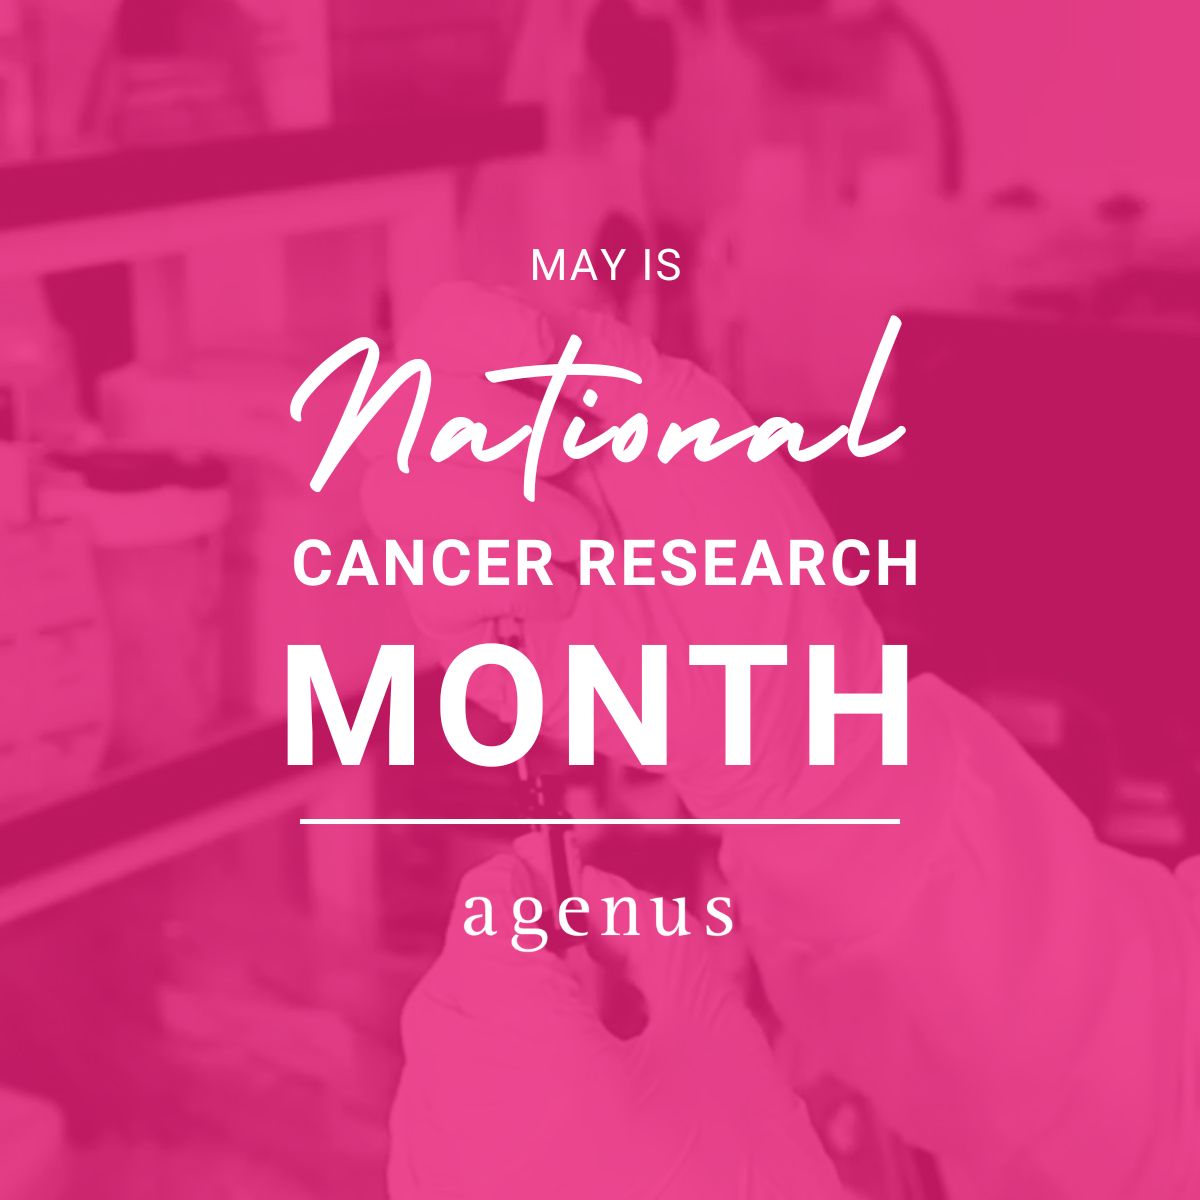 May 1st marks the start of Cancer Research Month – Agenus